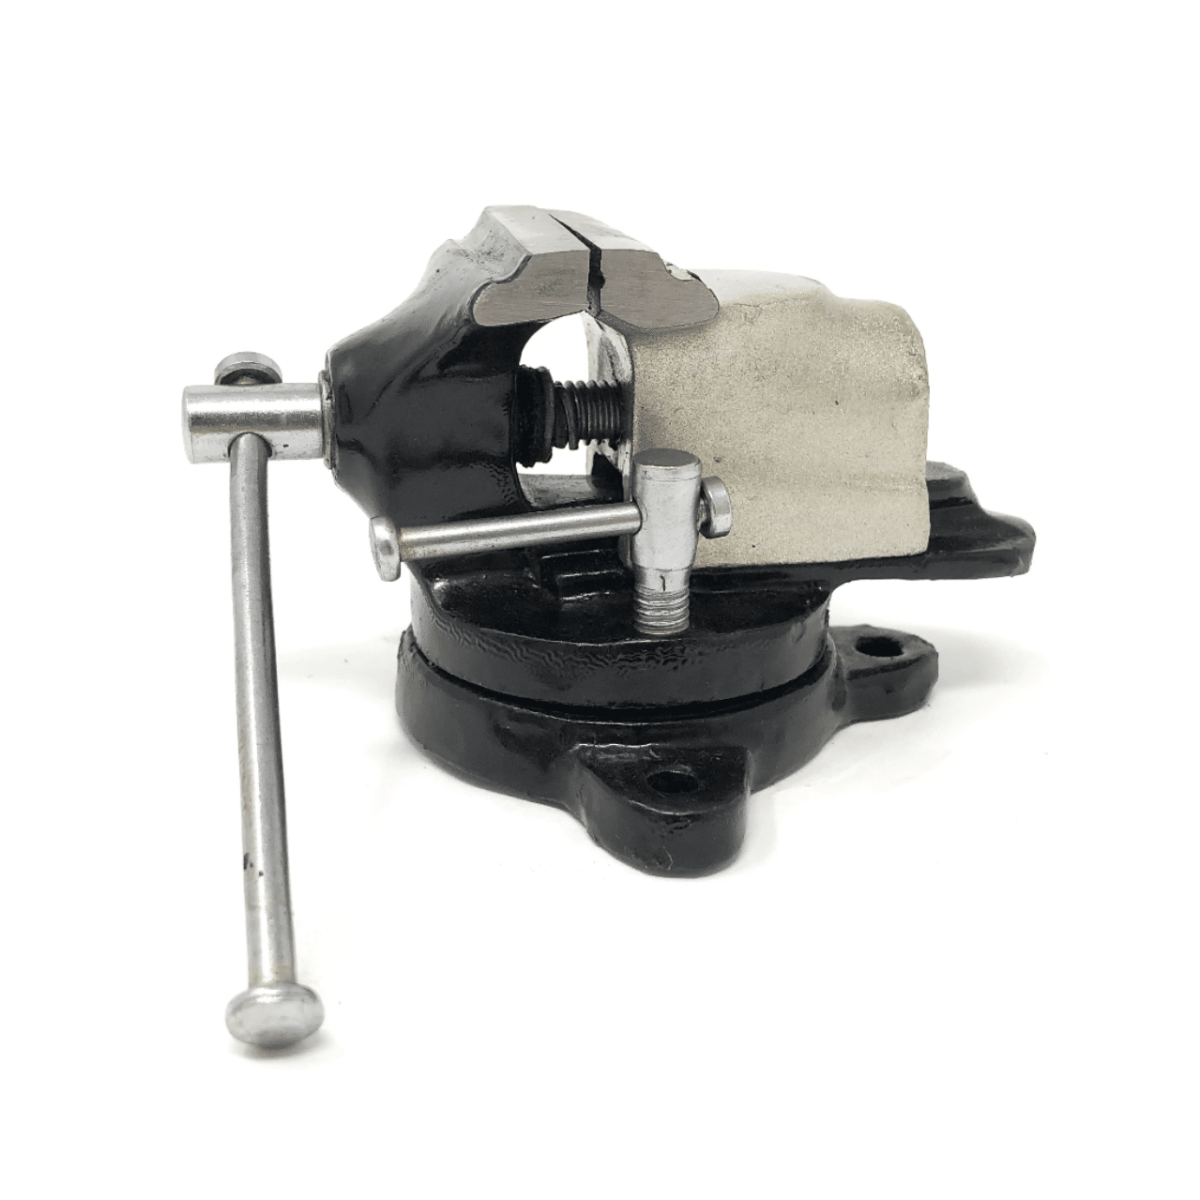 Jewellers Revolving Table Vice Bench Swivel Clamp Heavy Base Jewellery Making 194350112038 3 - Maddisons UK